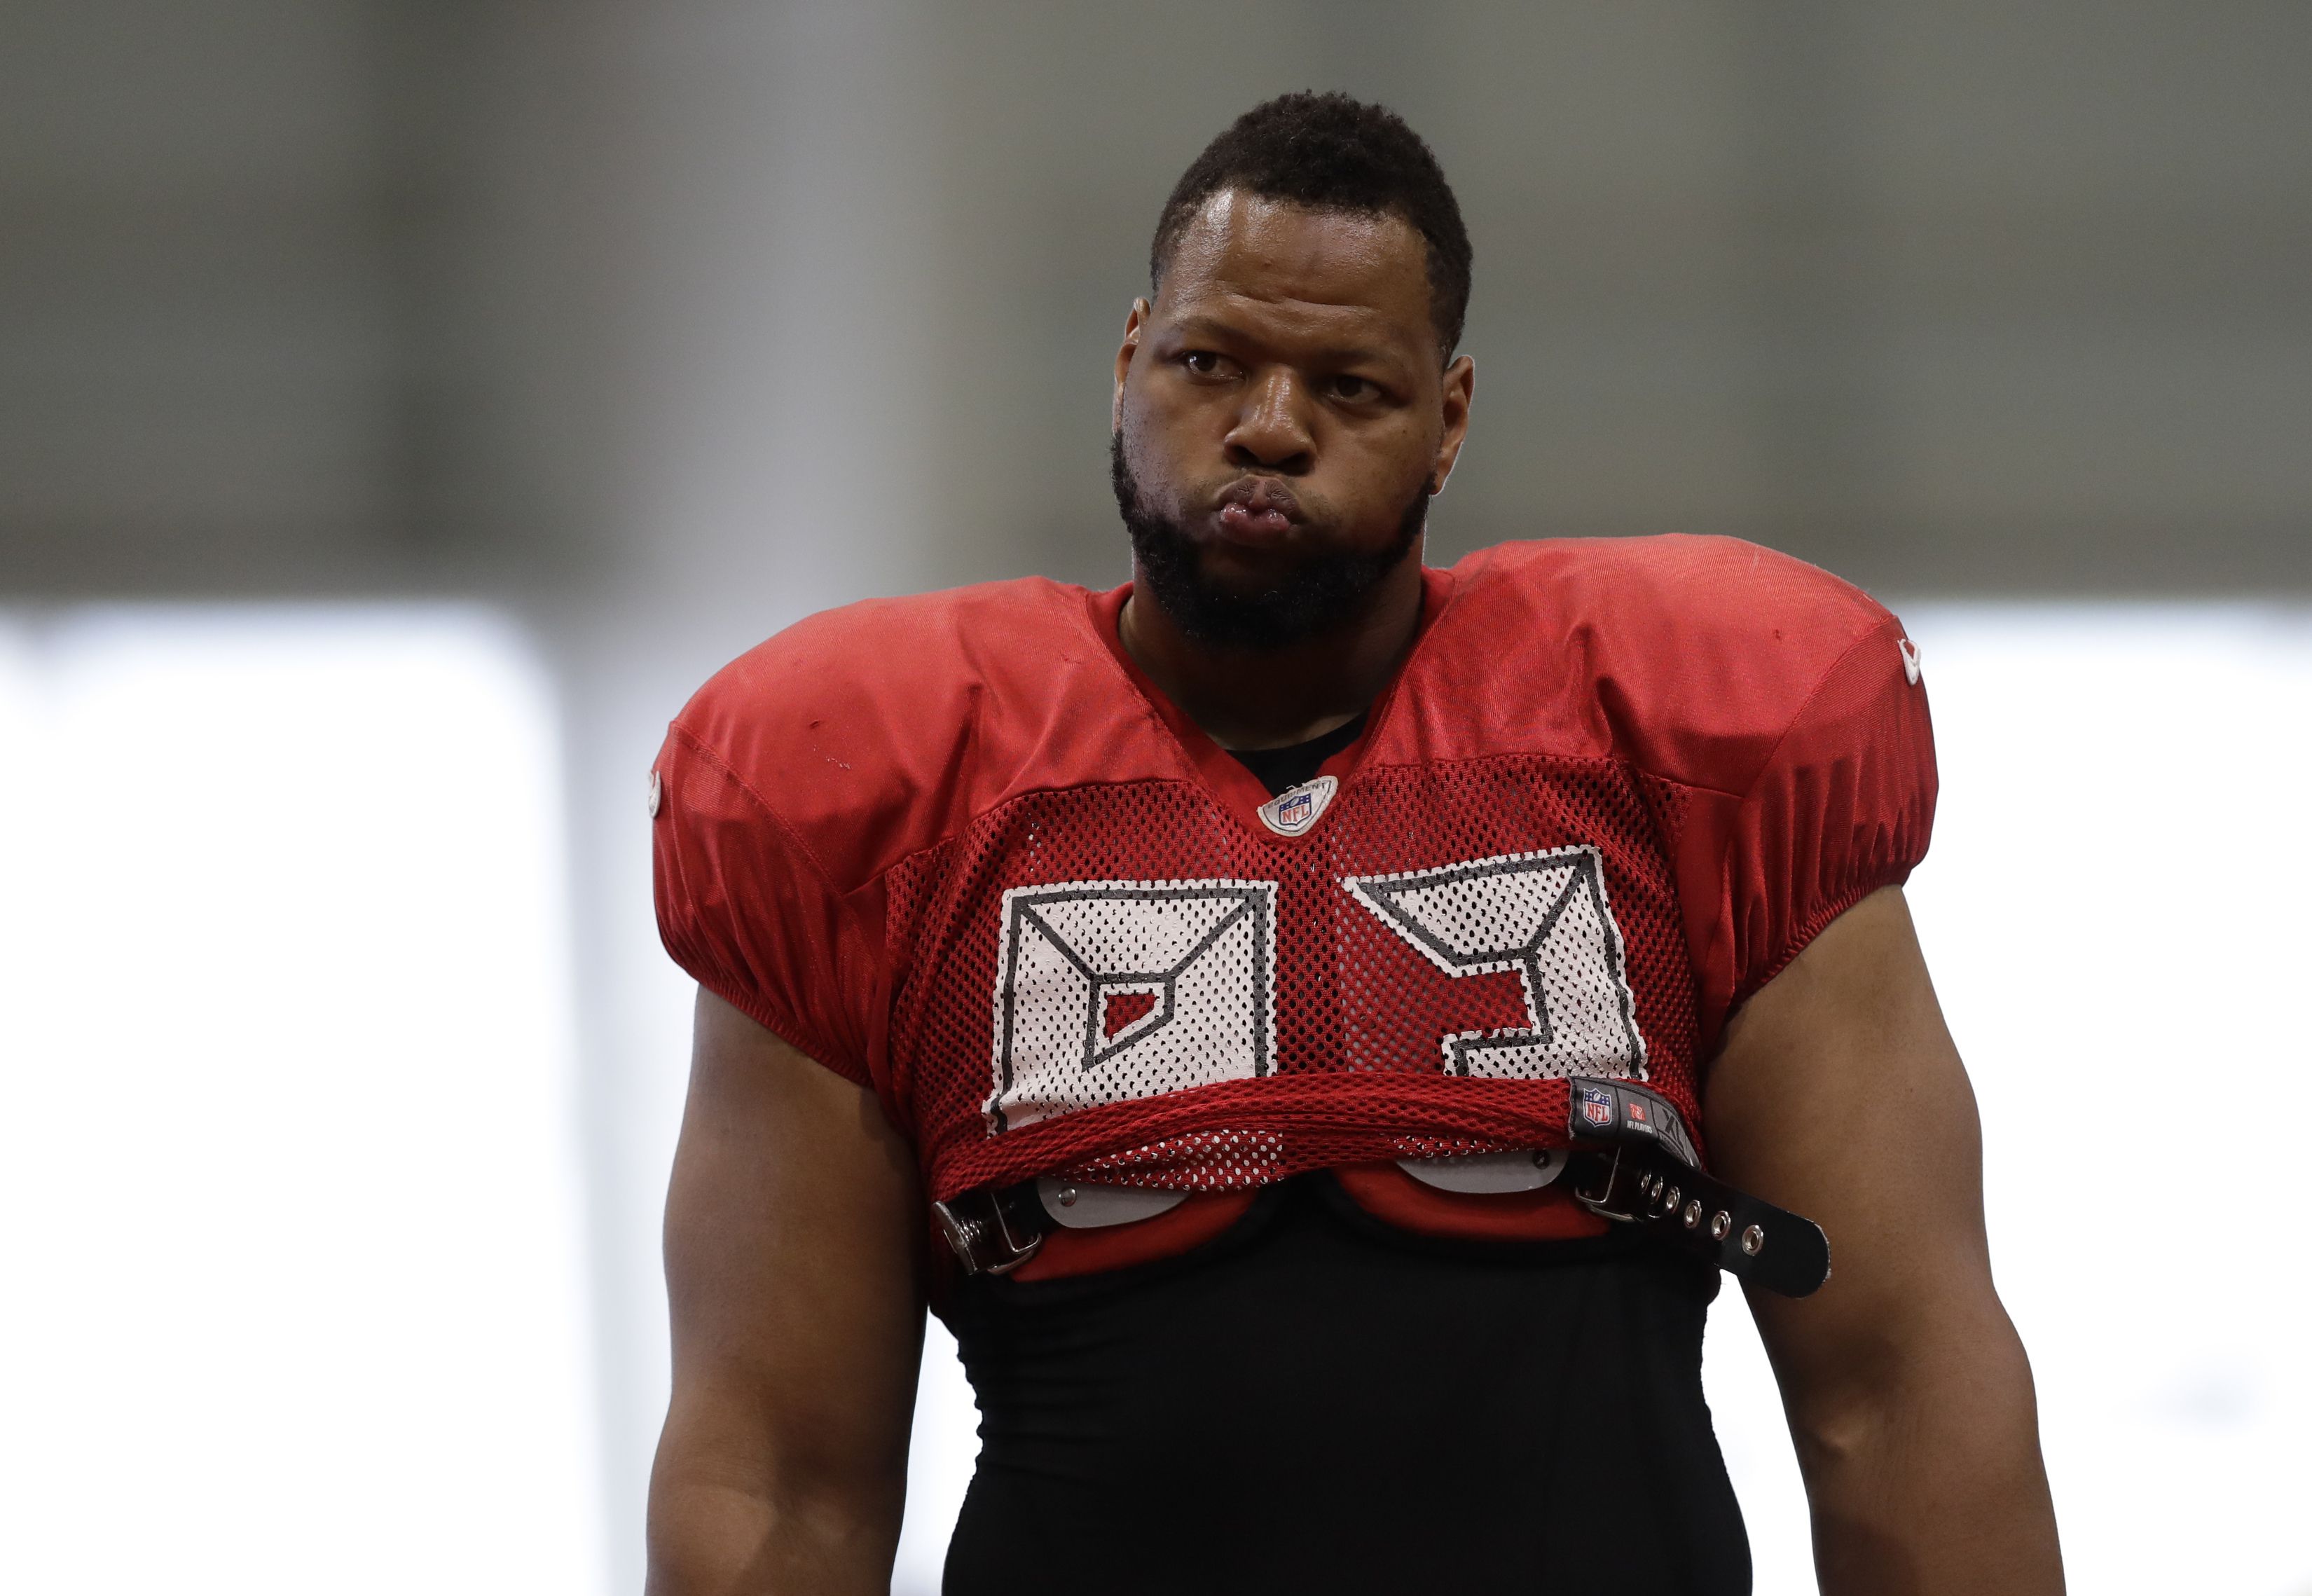 Ndamukong Suh's Detroit Lions career in pictures